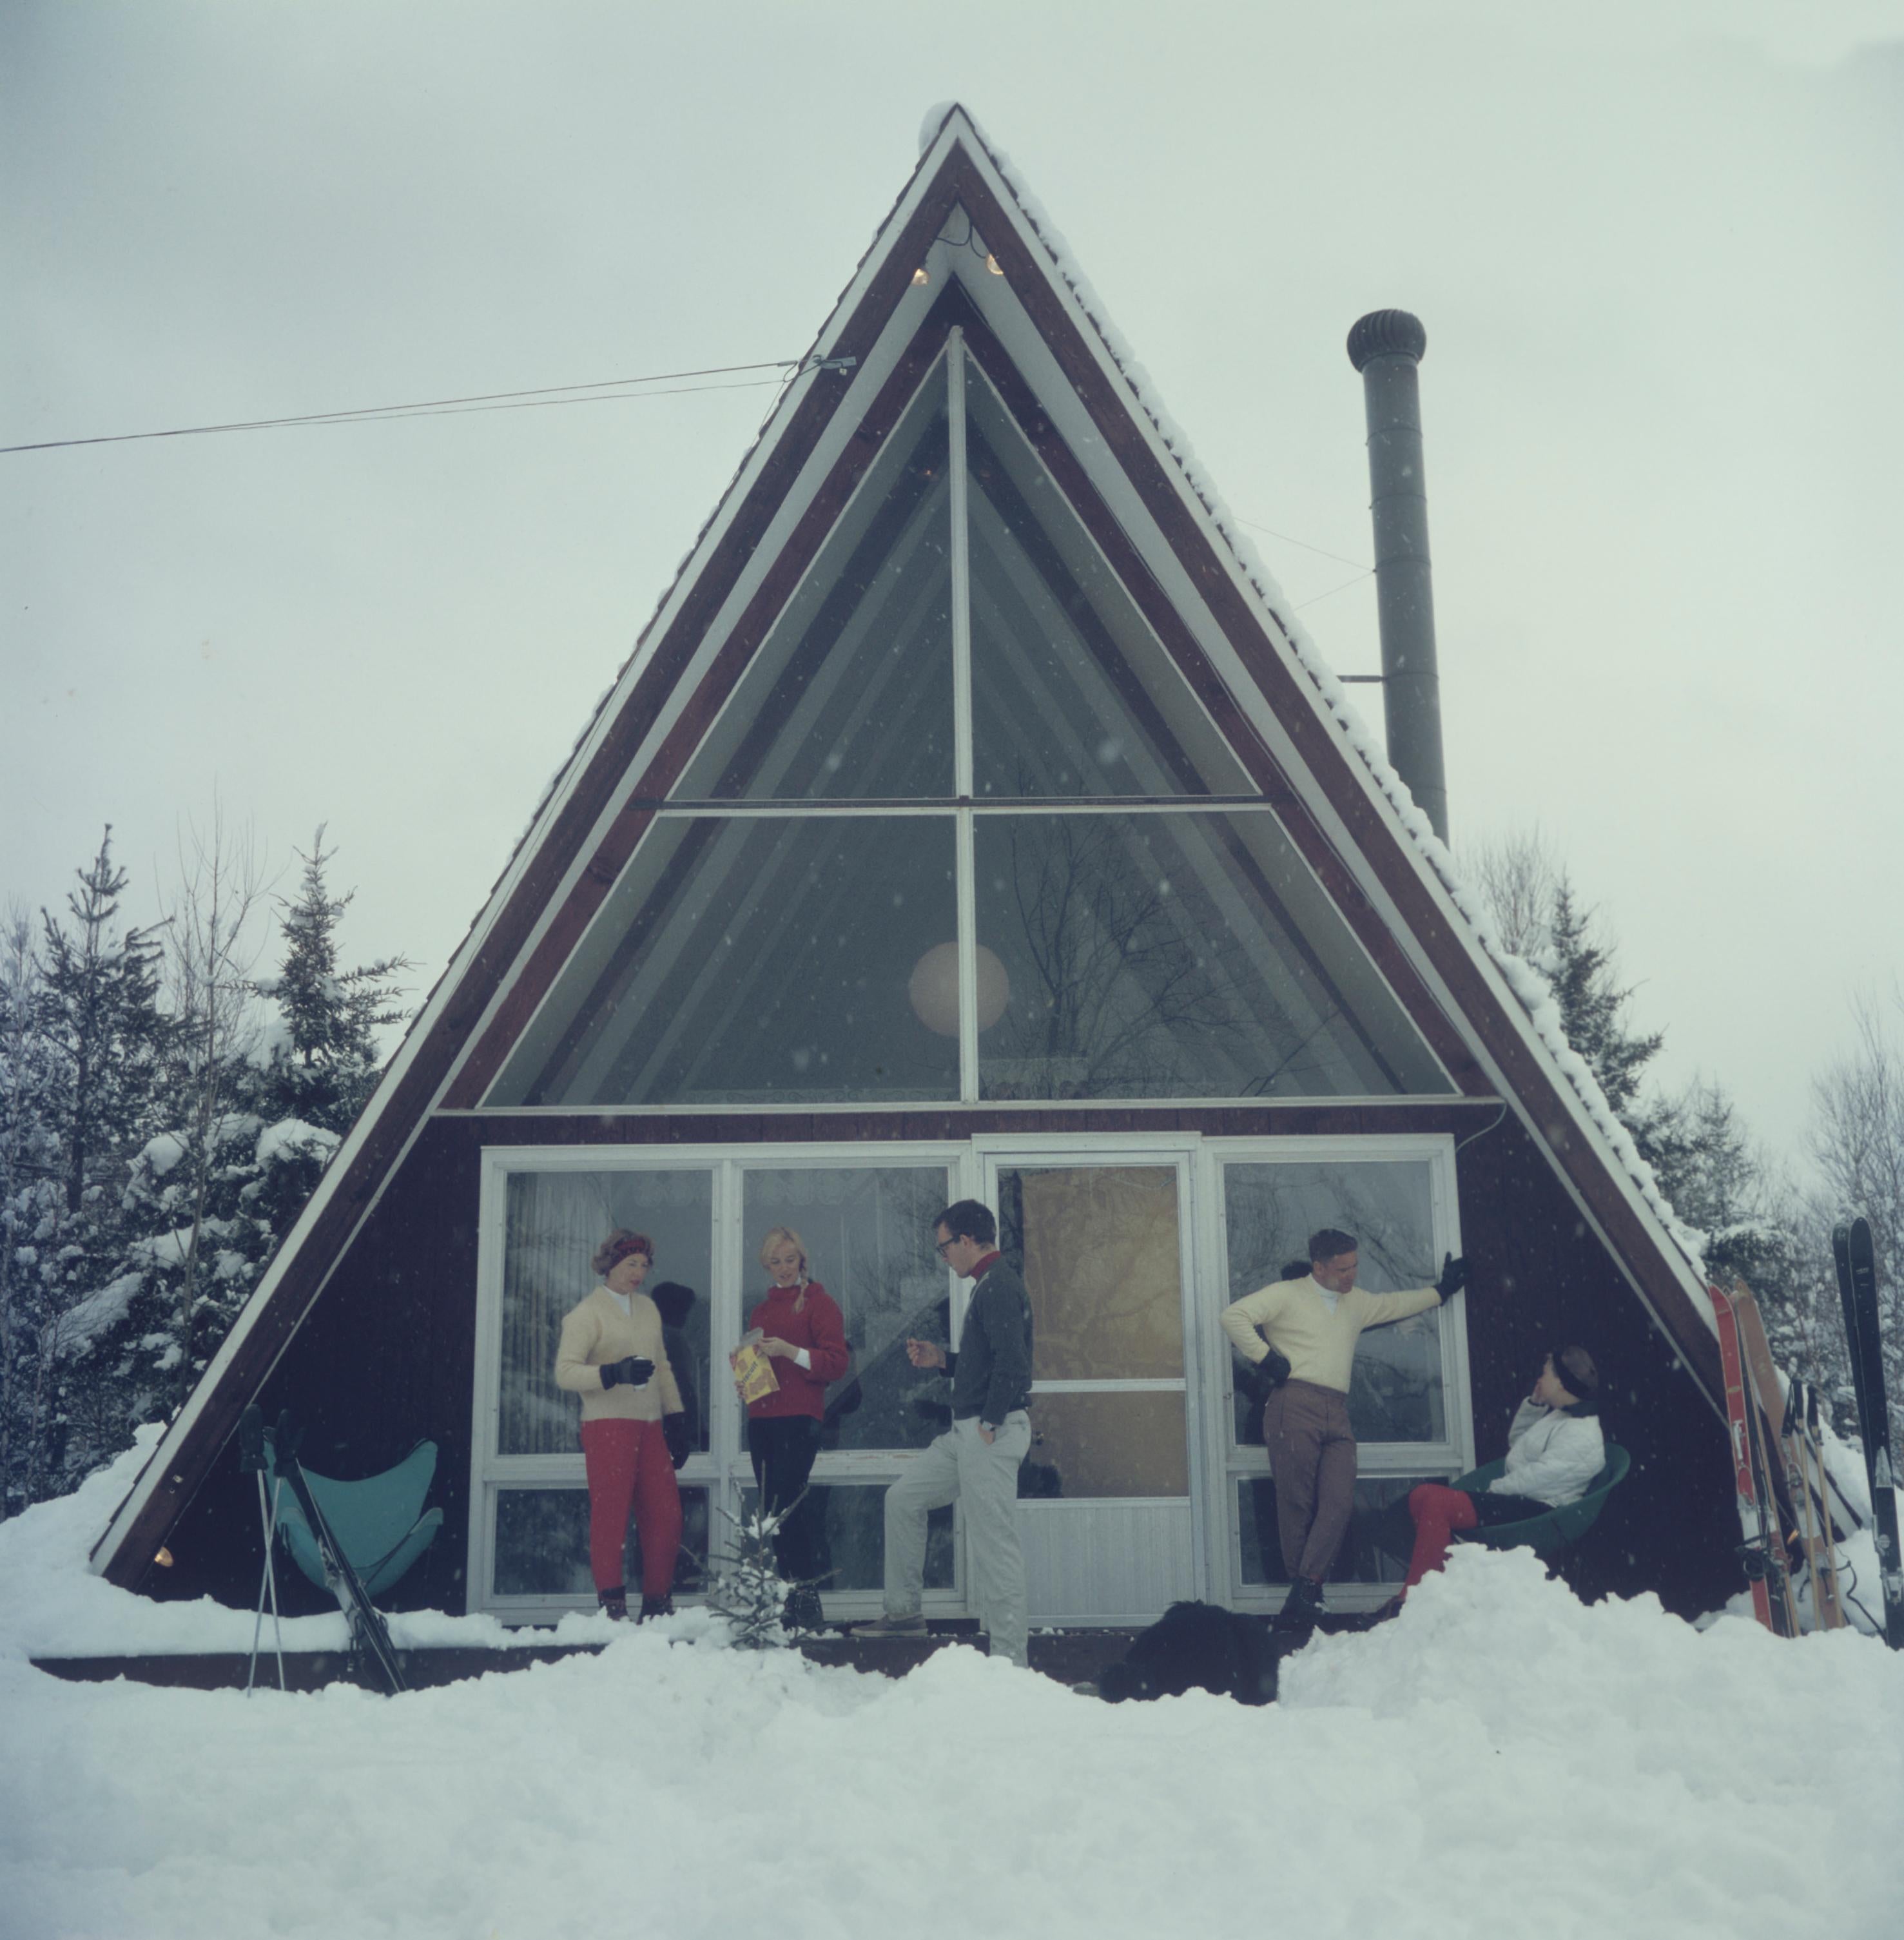 Slim Aarons Figurative Photograph - On the Slopes in Stowe, Estate Edition (Snowscape, Vintage Skaal House, Vermont)